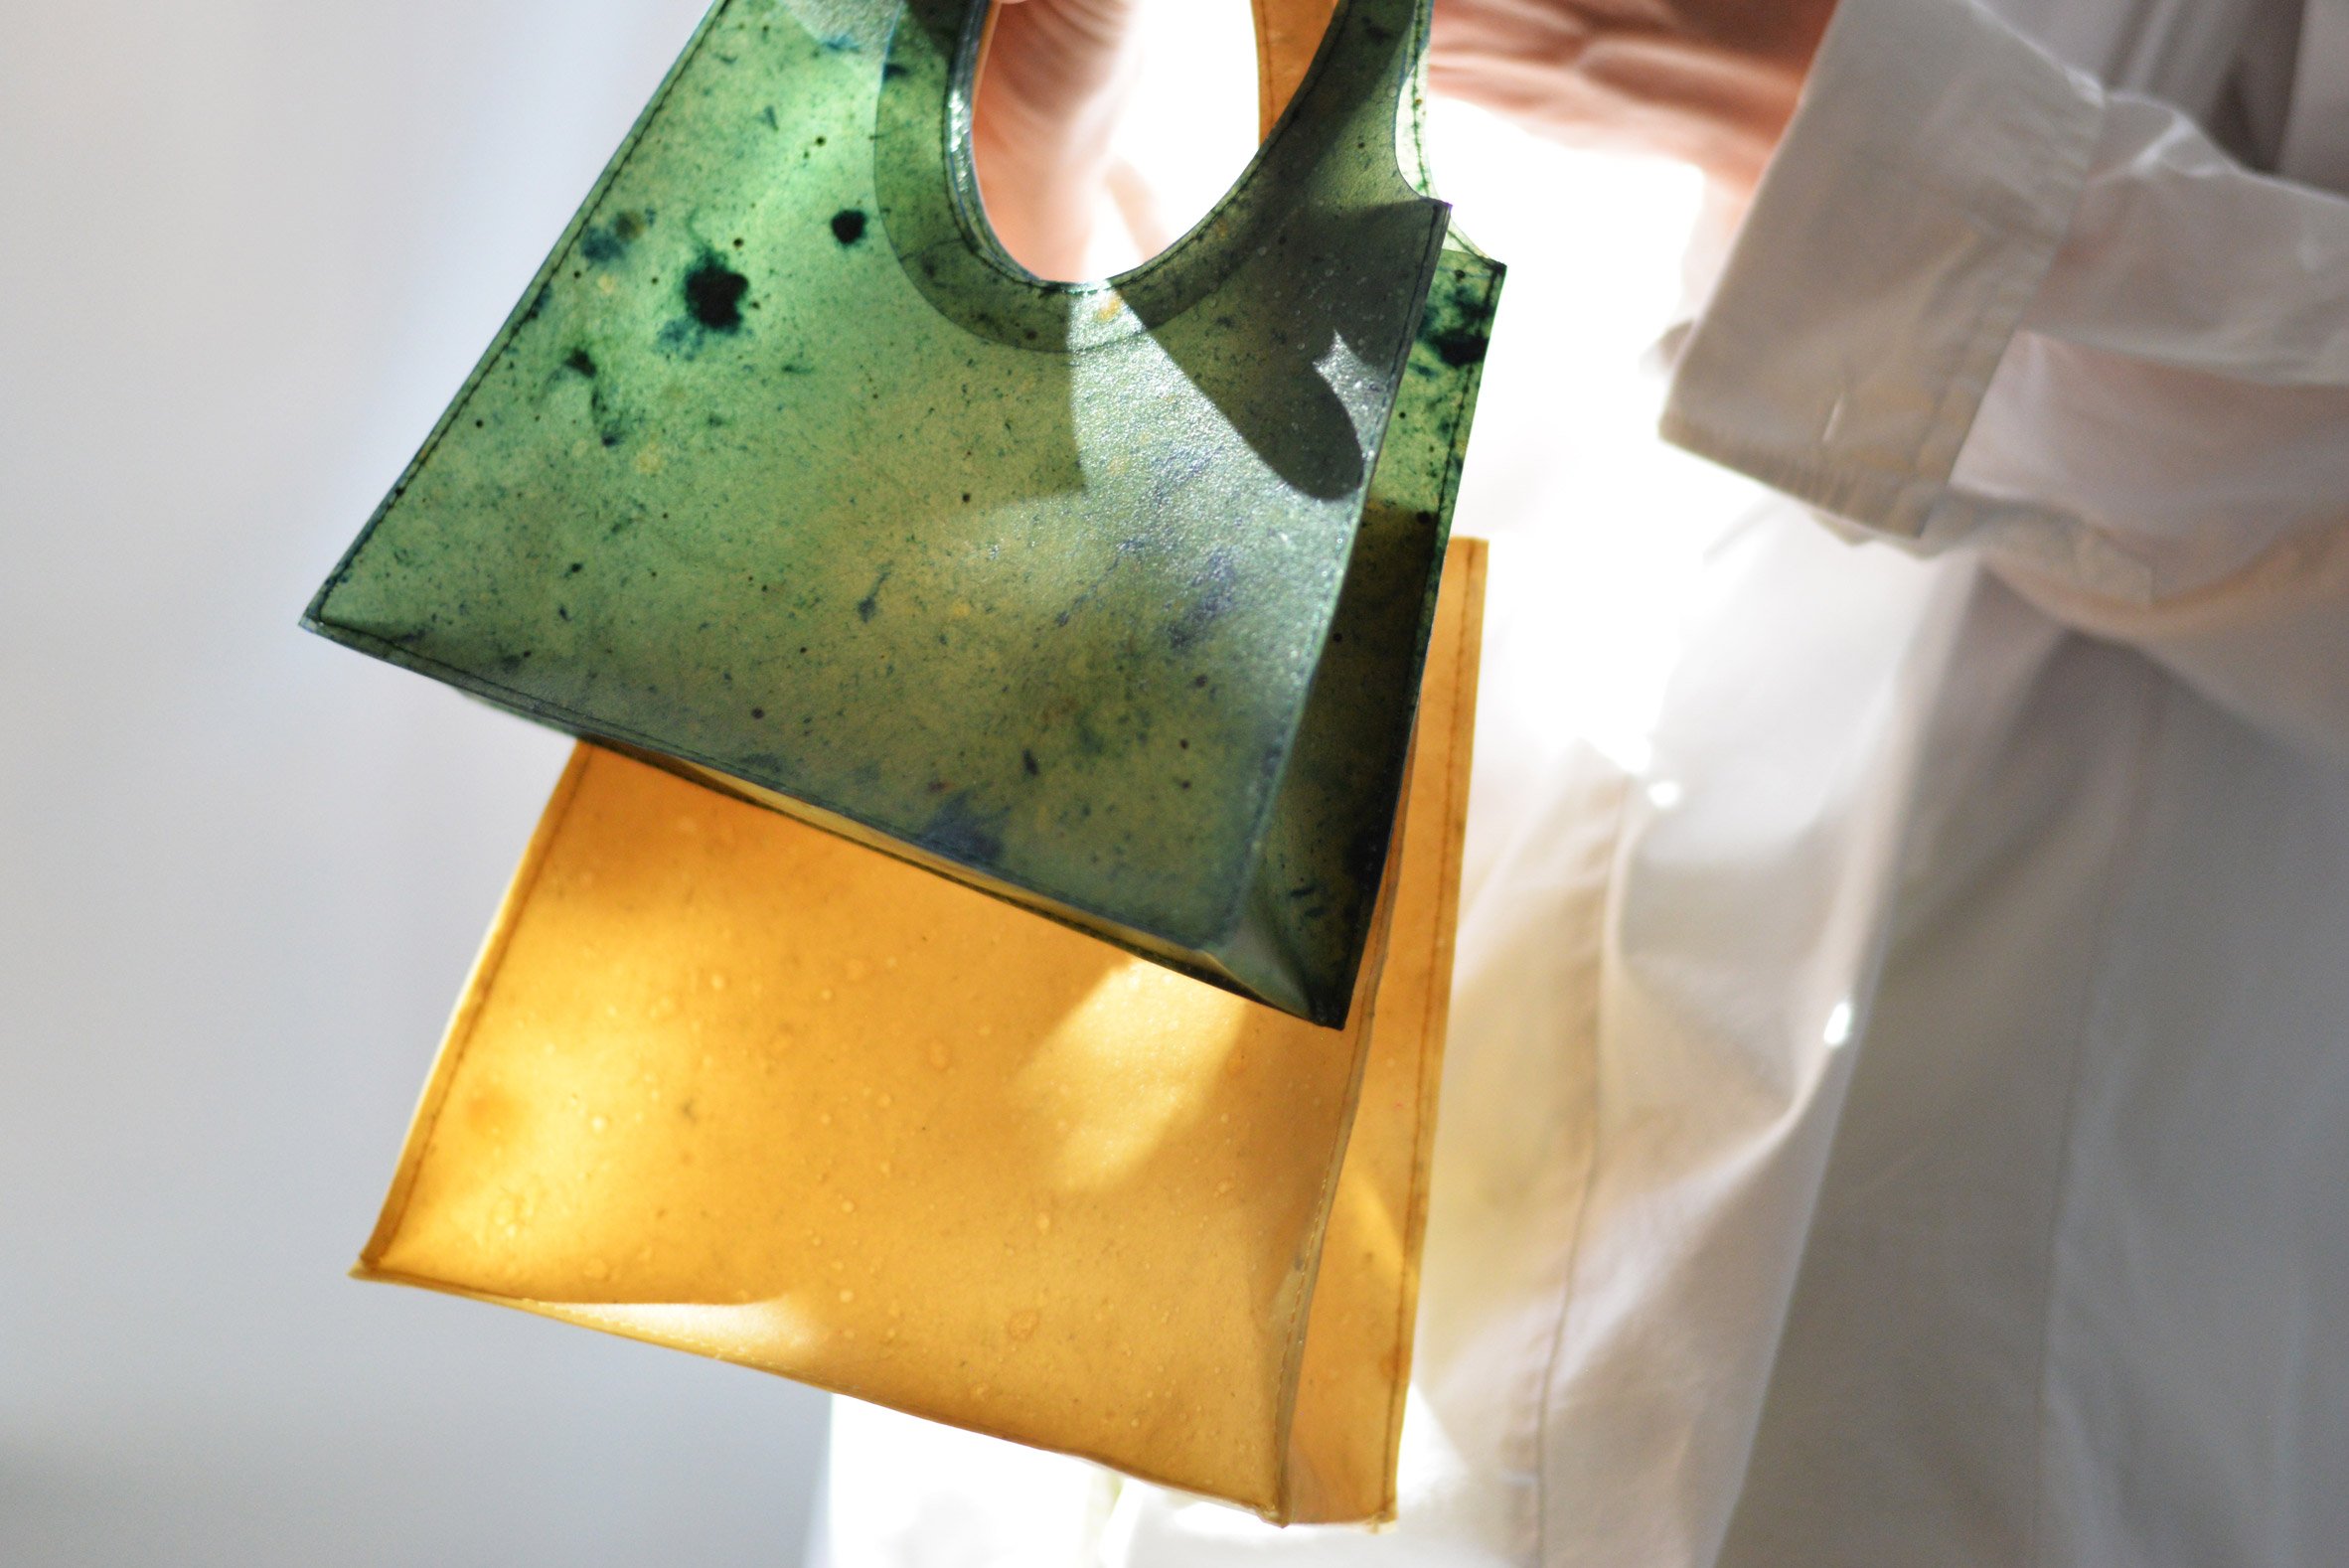 Small Sonnet155 bag in green and larger tote bag in yellow